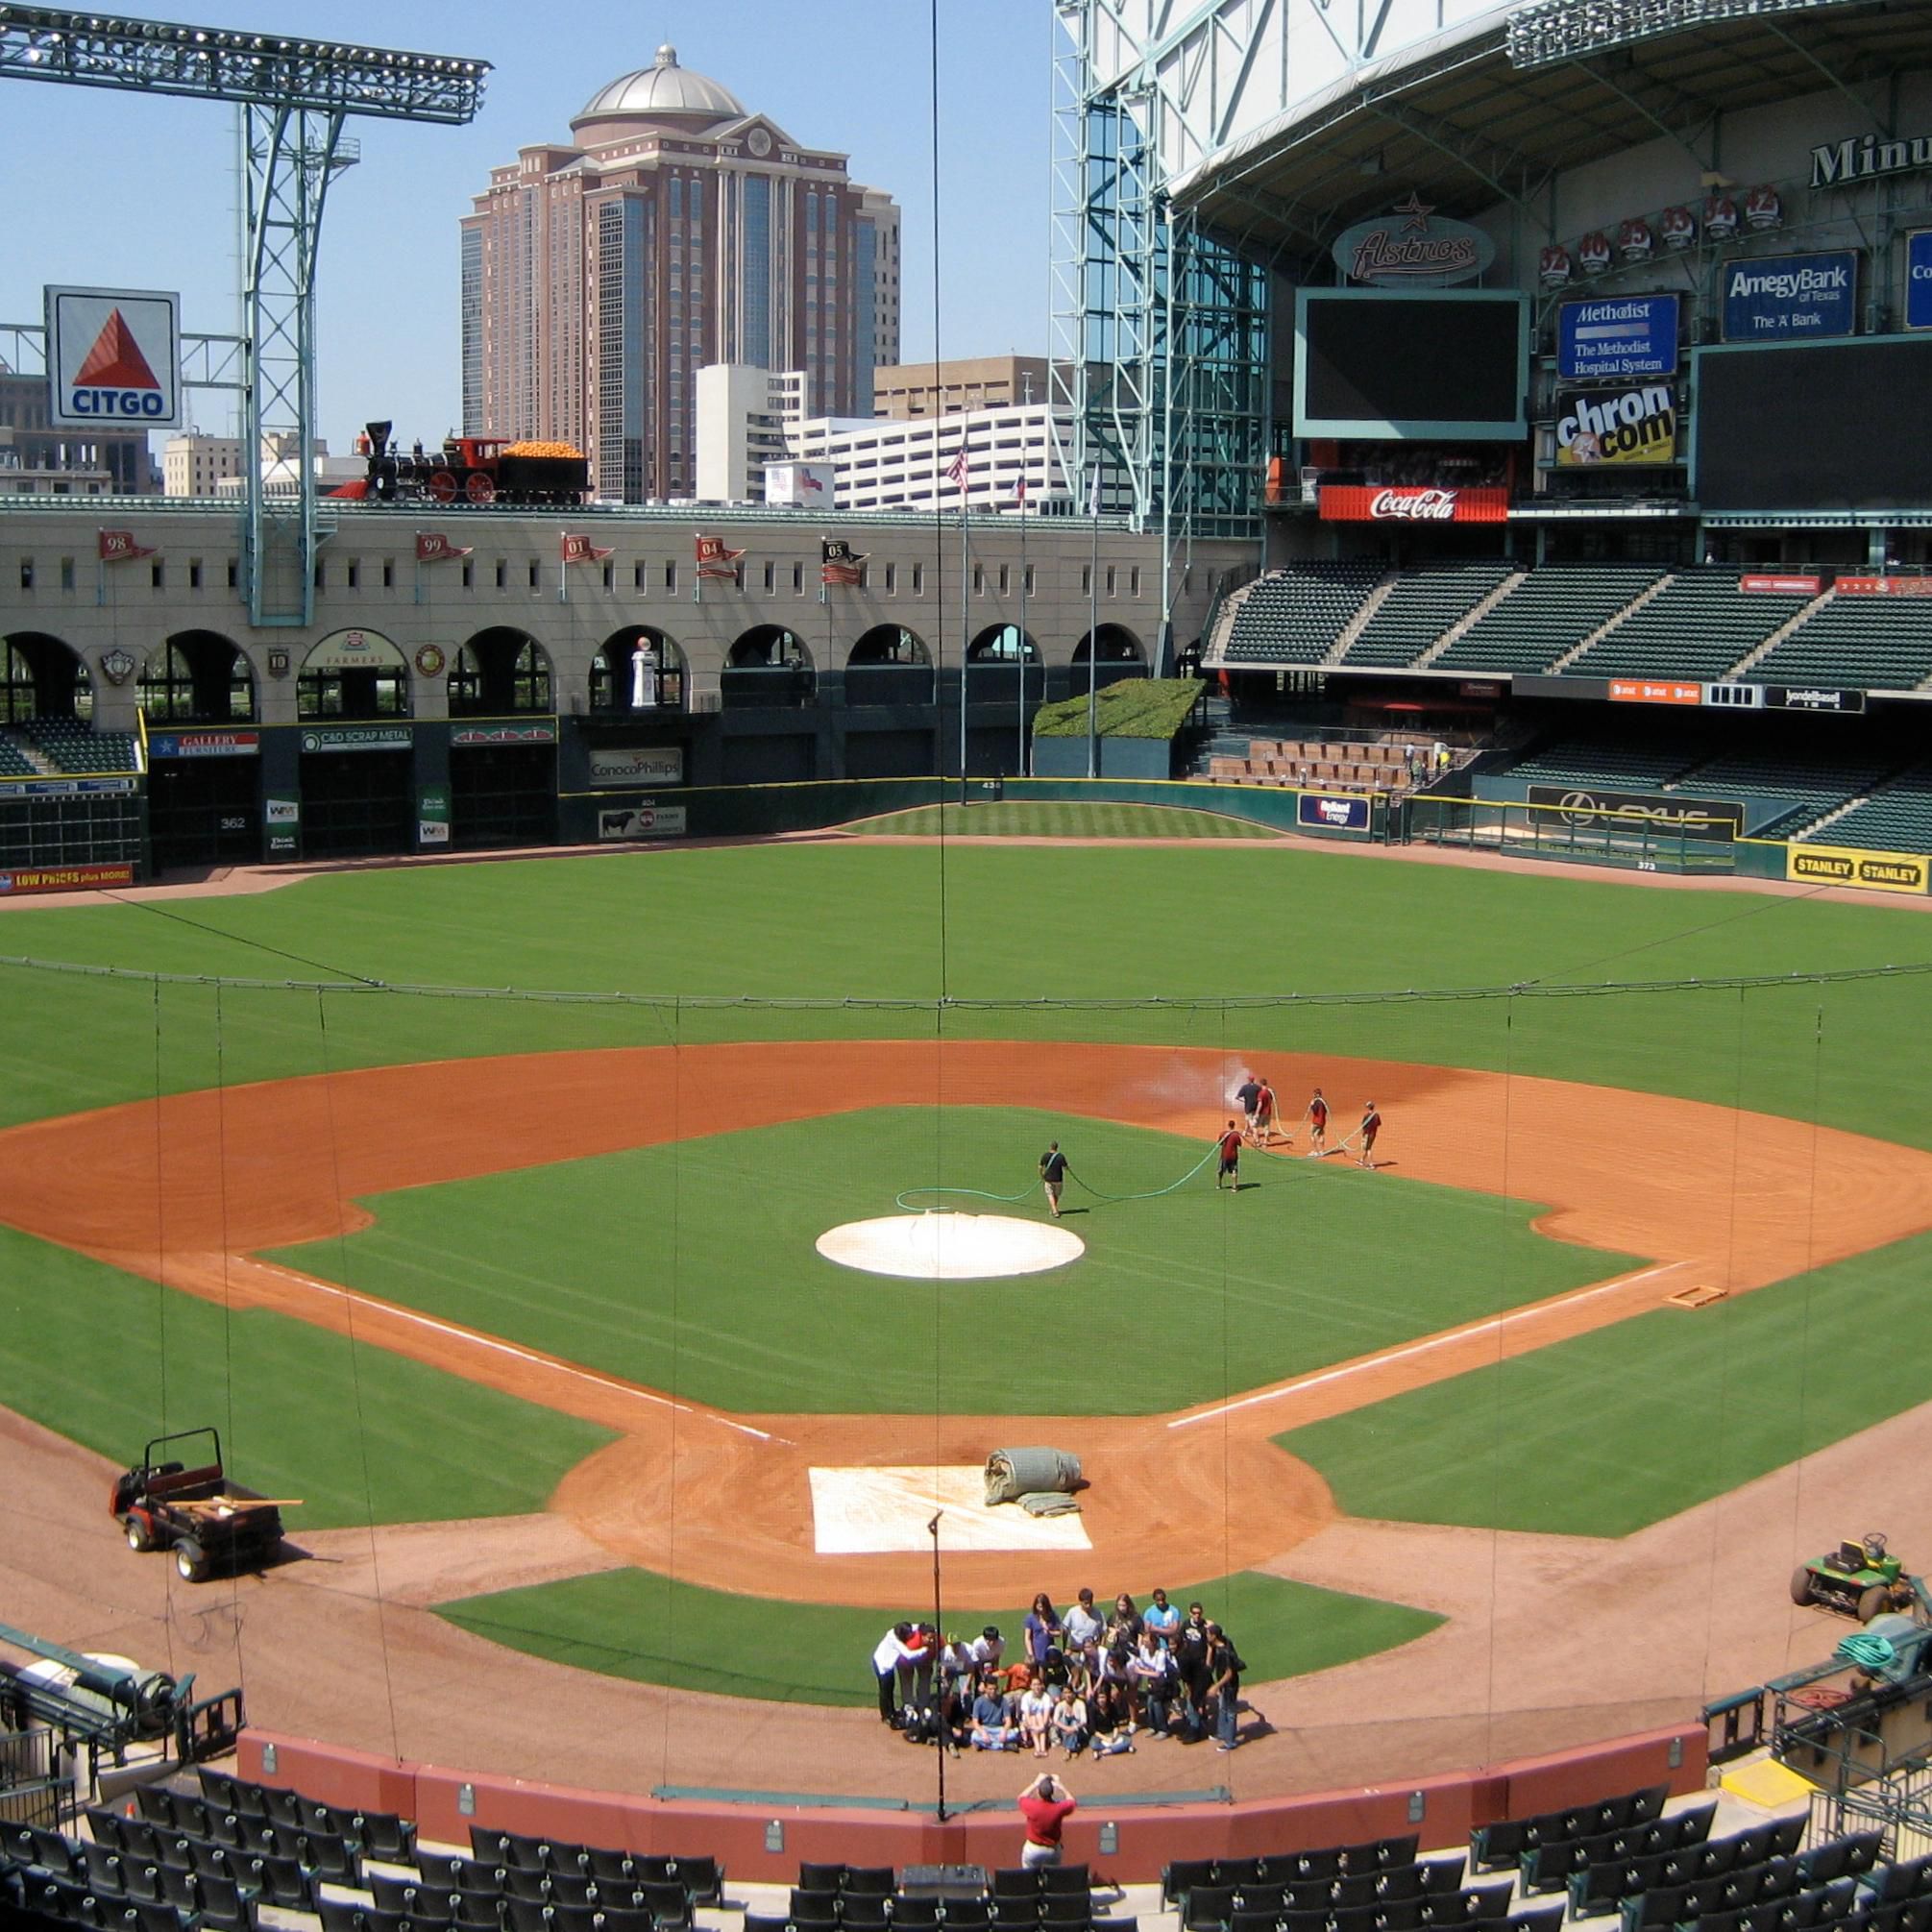 Catch a home run at Minute Maid Park, home of the Houston Astros.